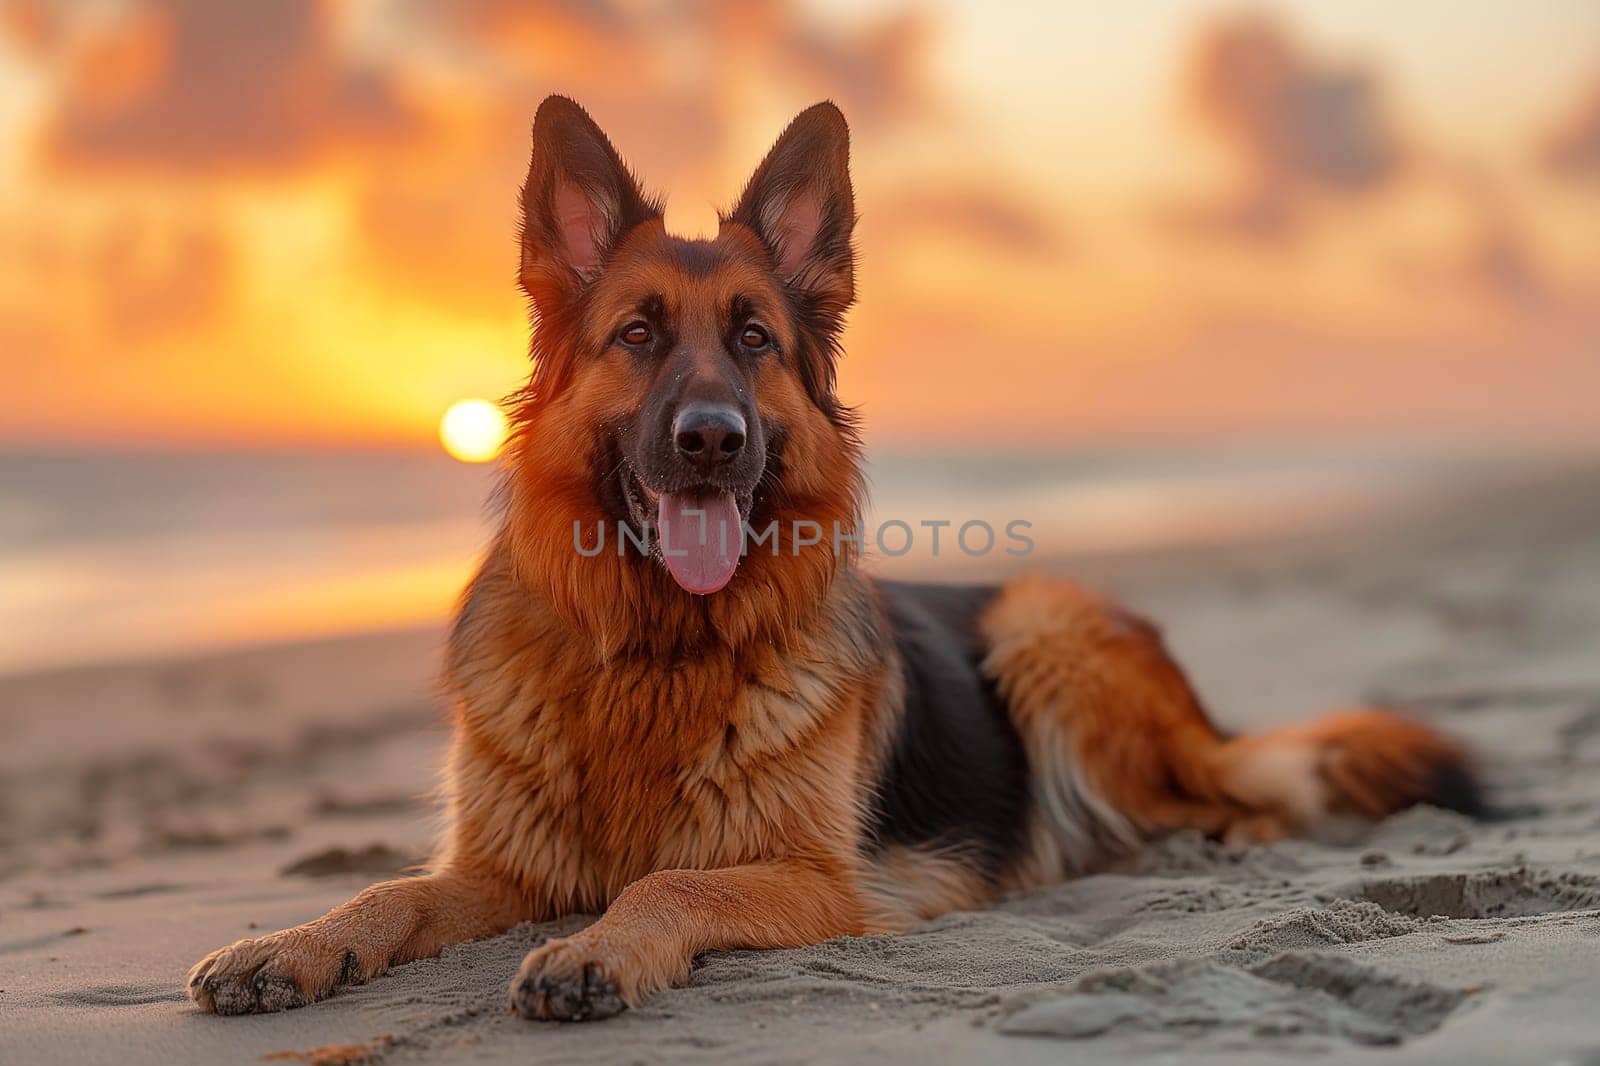 A German shepherd relaxing on the beach during sunset by Hype2art